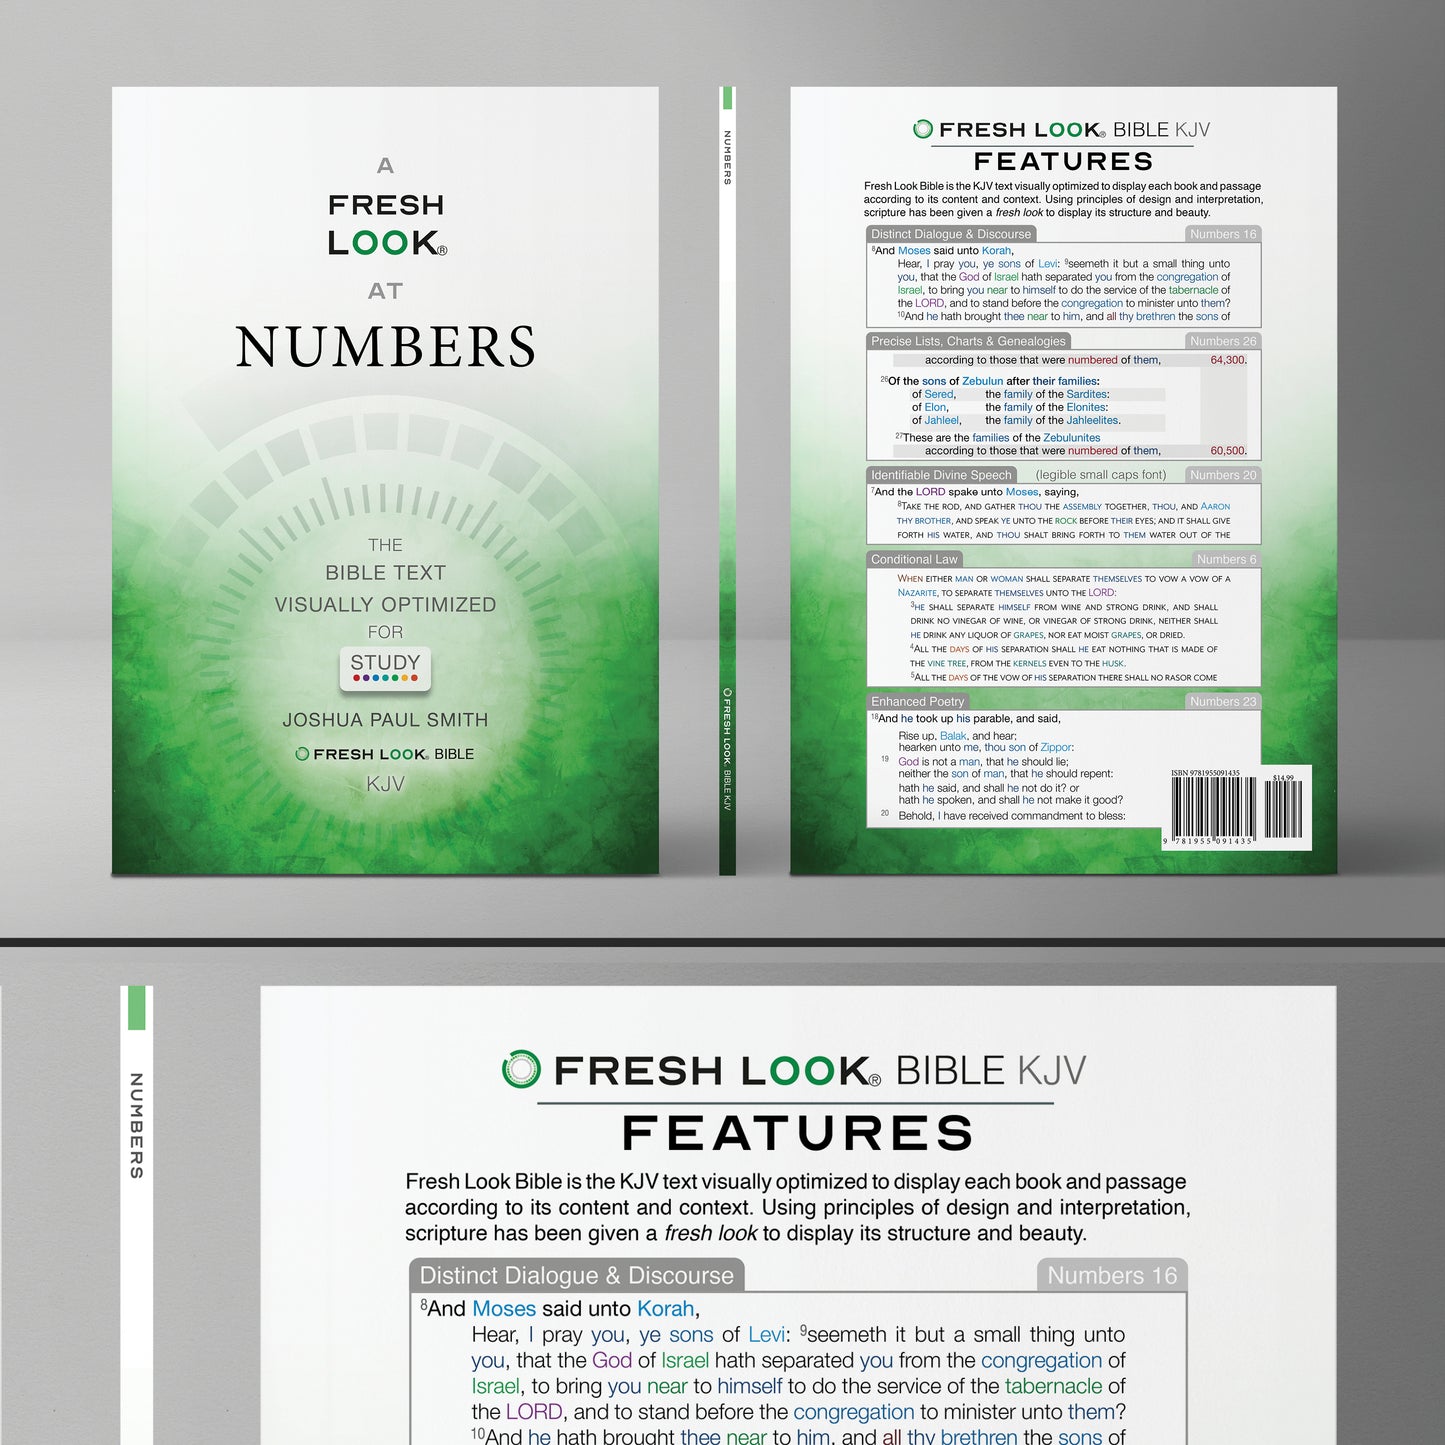 Numbers Book (Study)